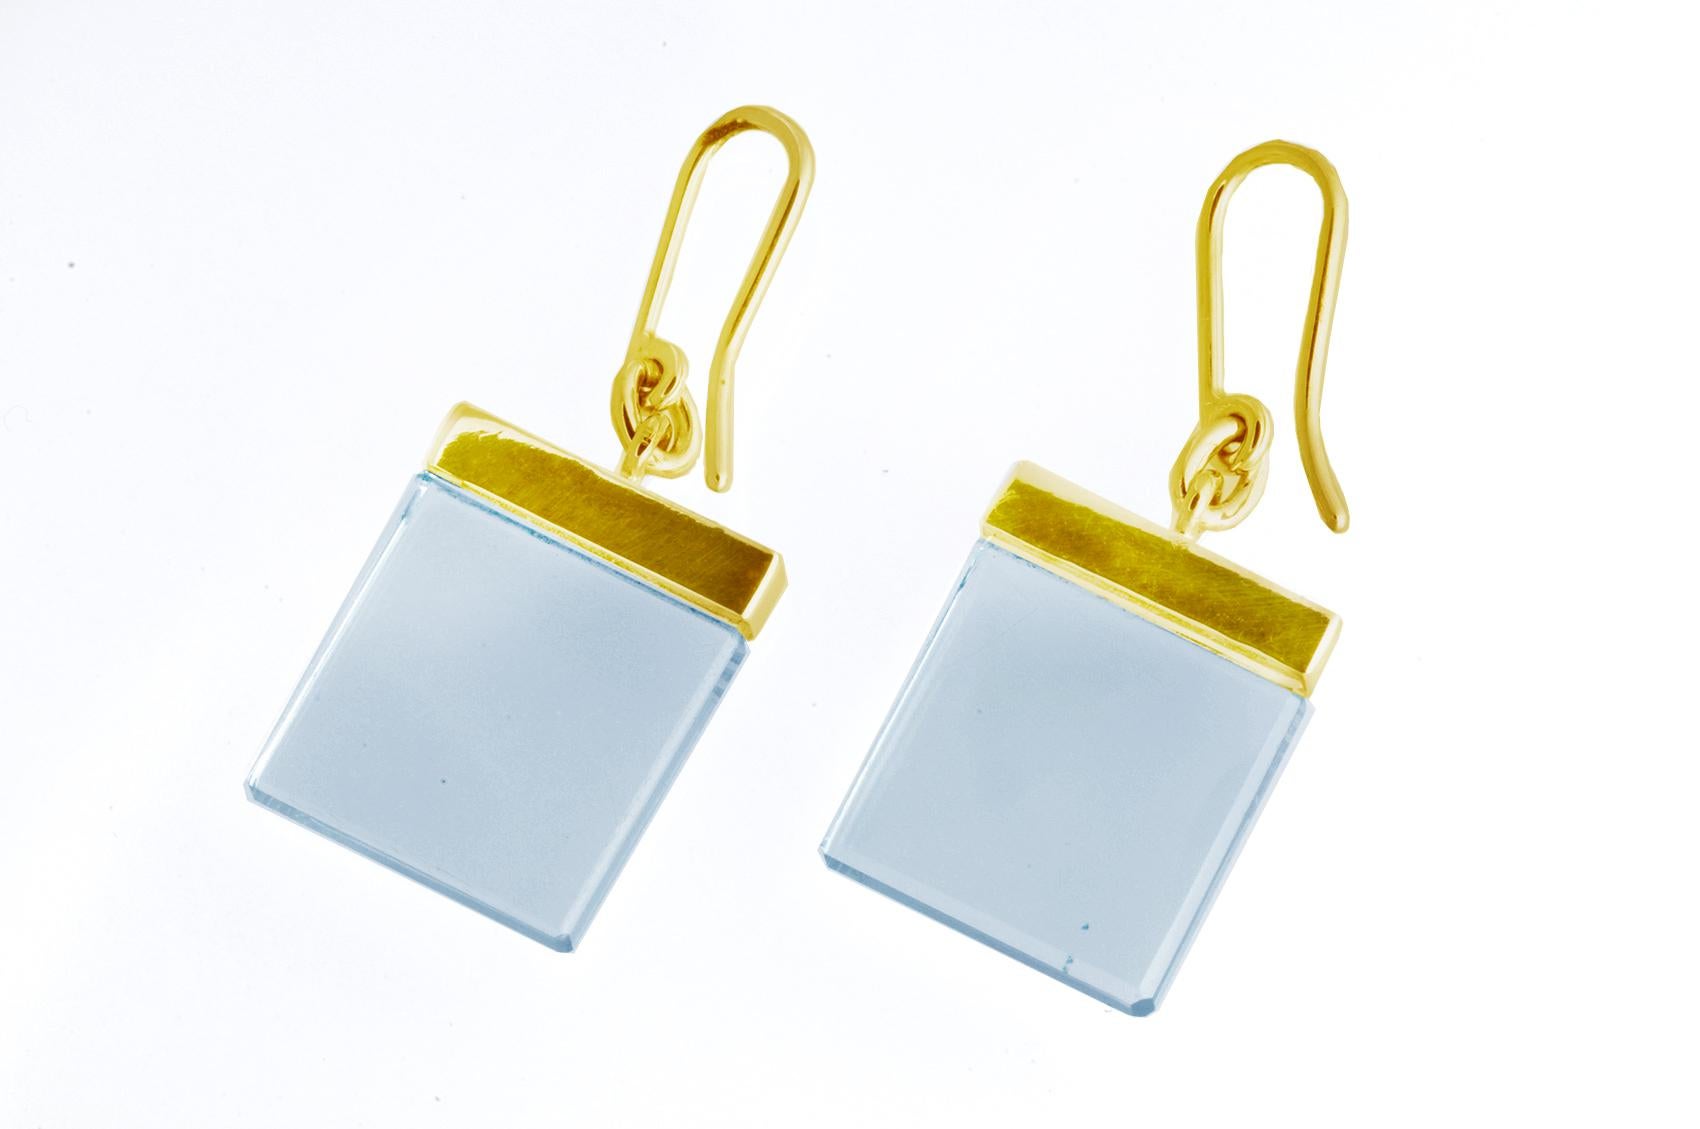 The Ink collection, which has been featured in Harper's Bazaar UA and Vogue UA, includes these stunning earrings made of 18 karat yellow gold with a reference to the art deco style. The earrings are designed by the Berlin-based oil painter and